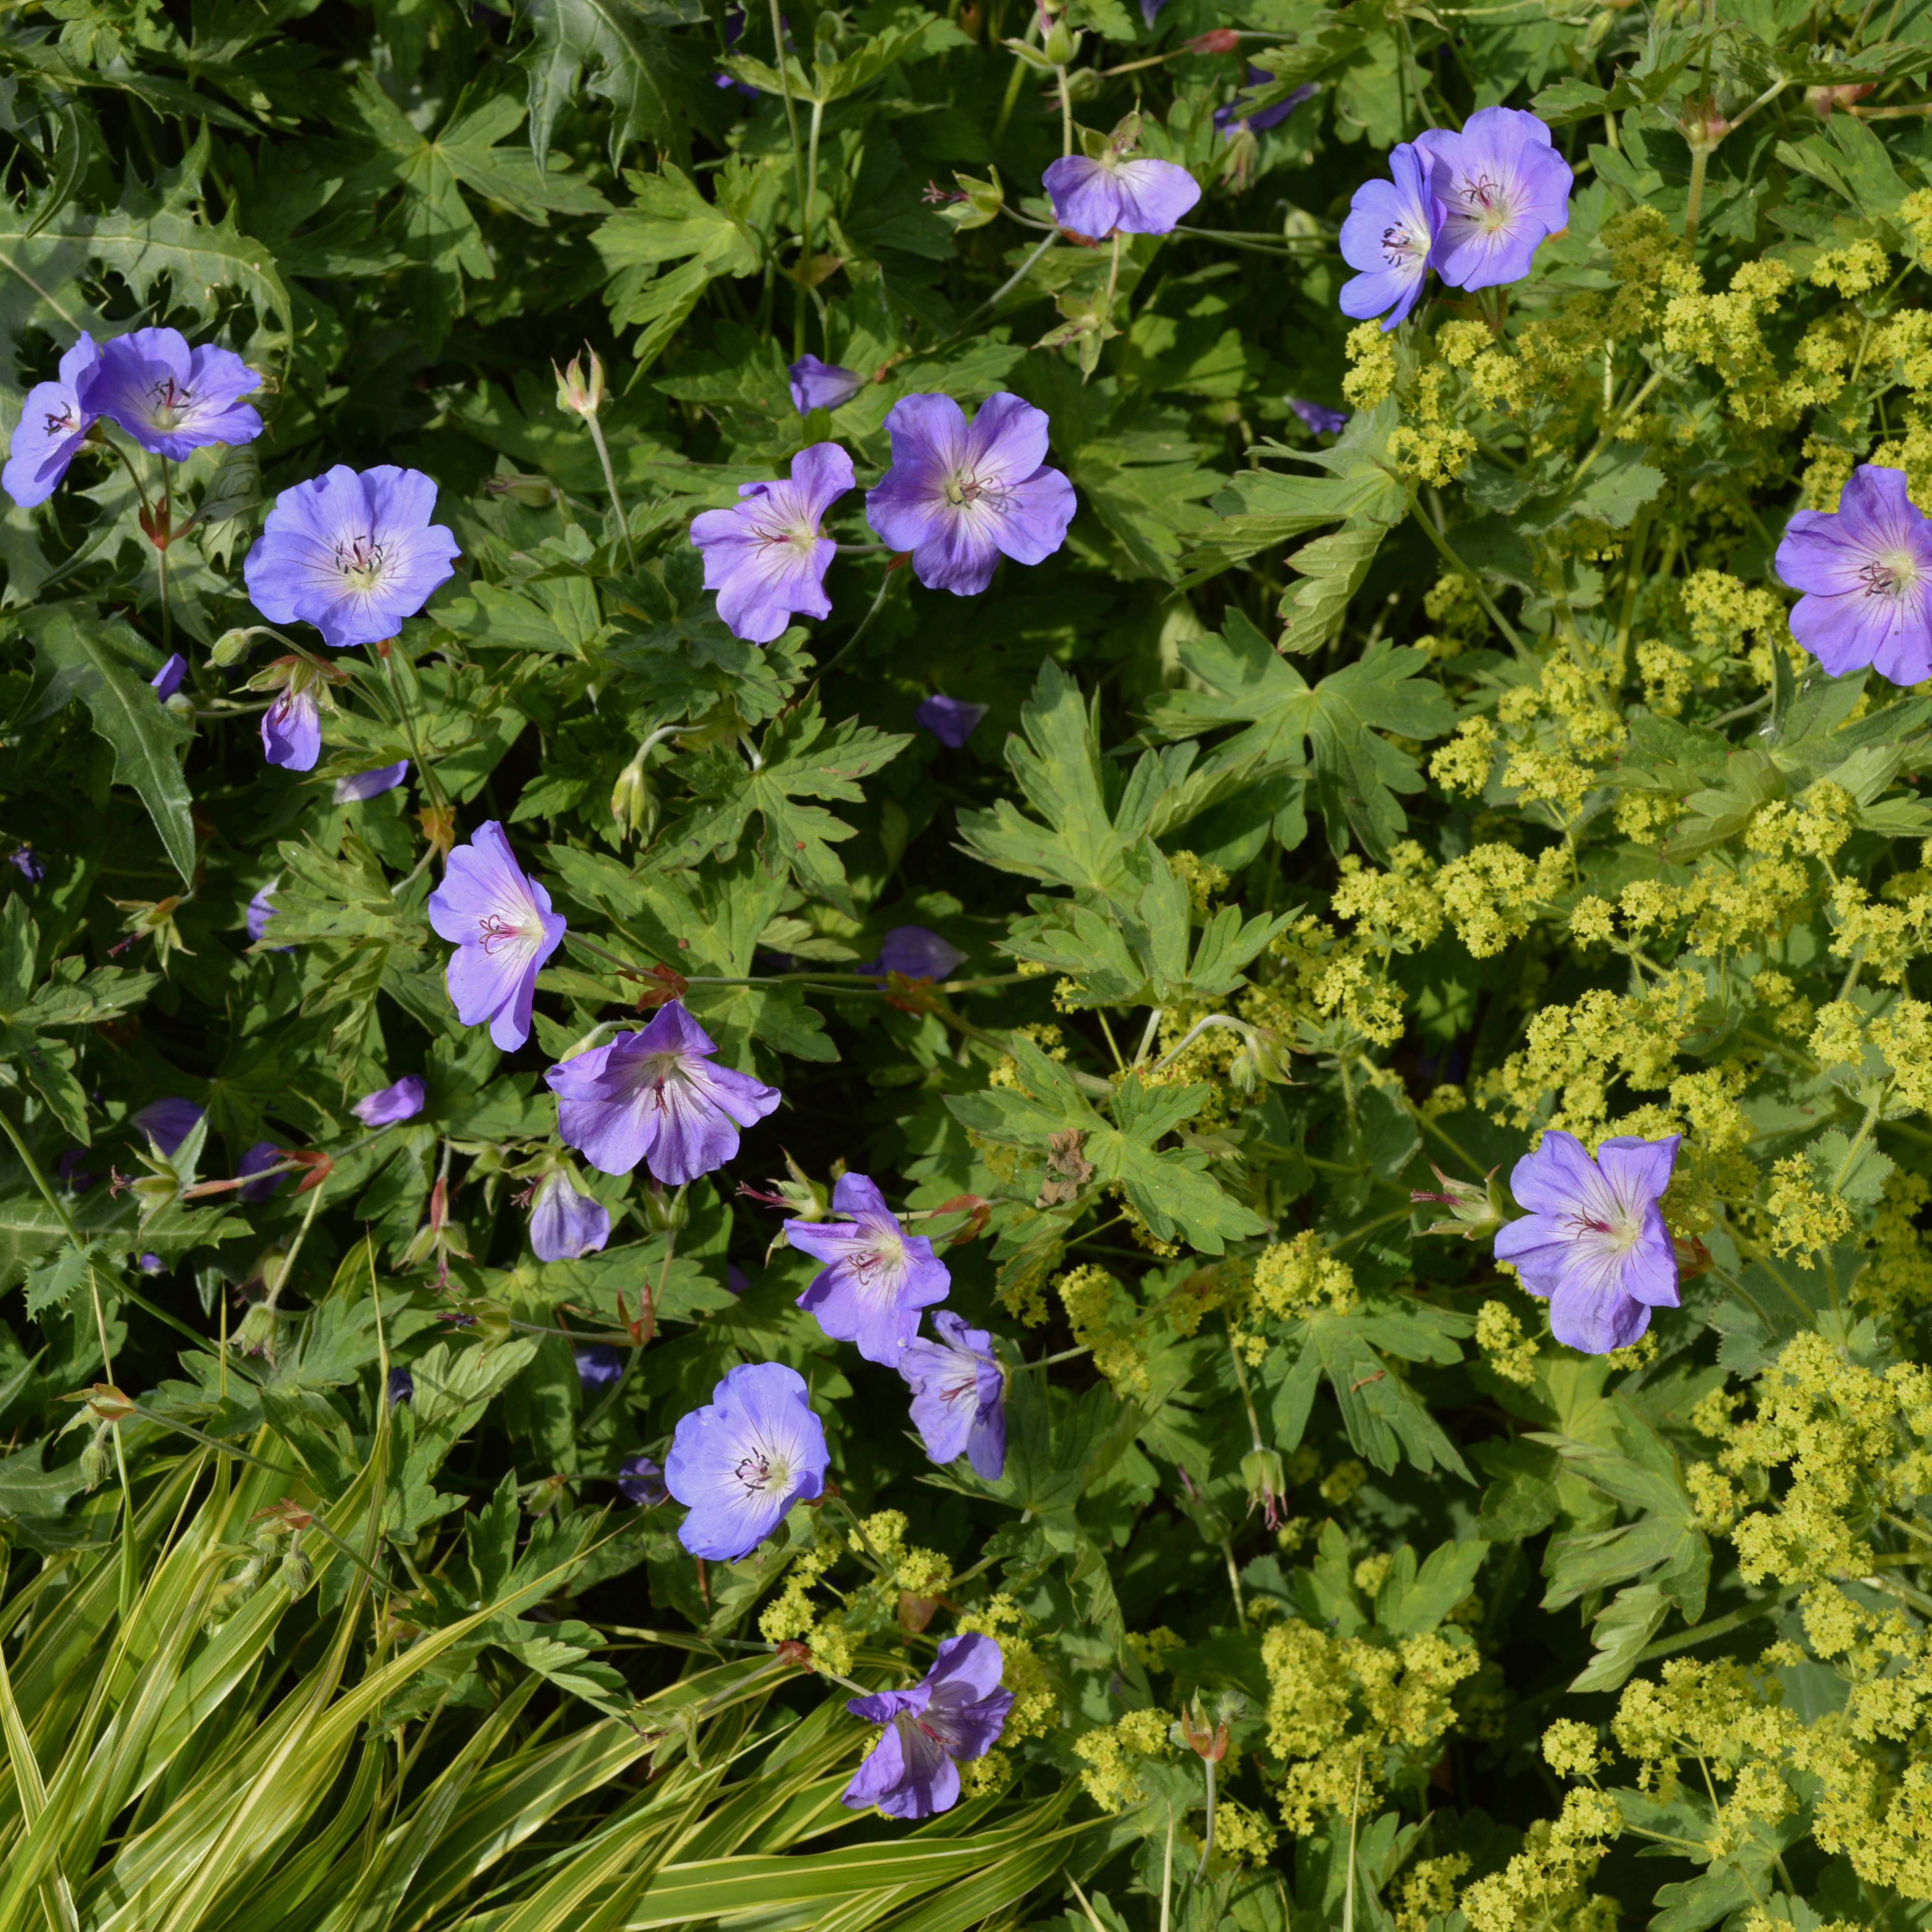 Geranium, or Cranesbill, flowers are purple and stand out with contrasting bring green leaves in a shade garden..